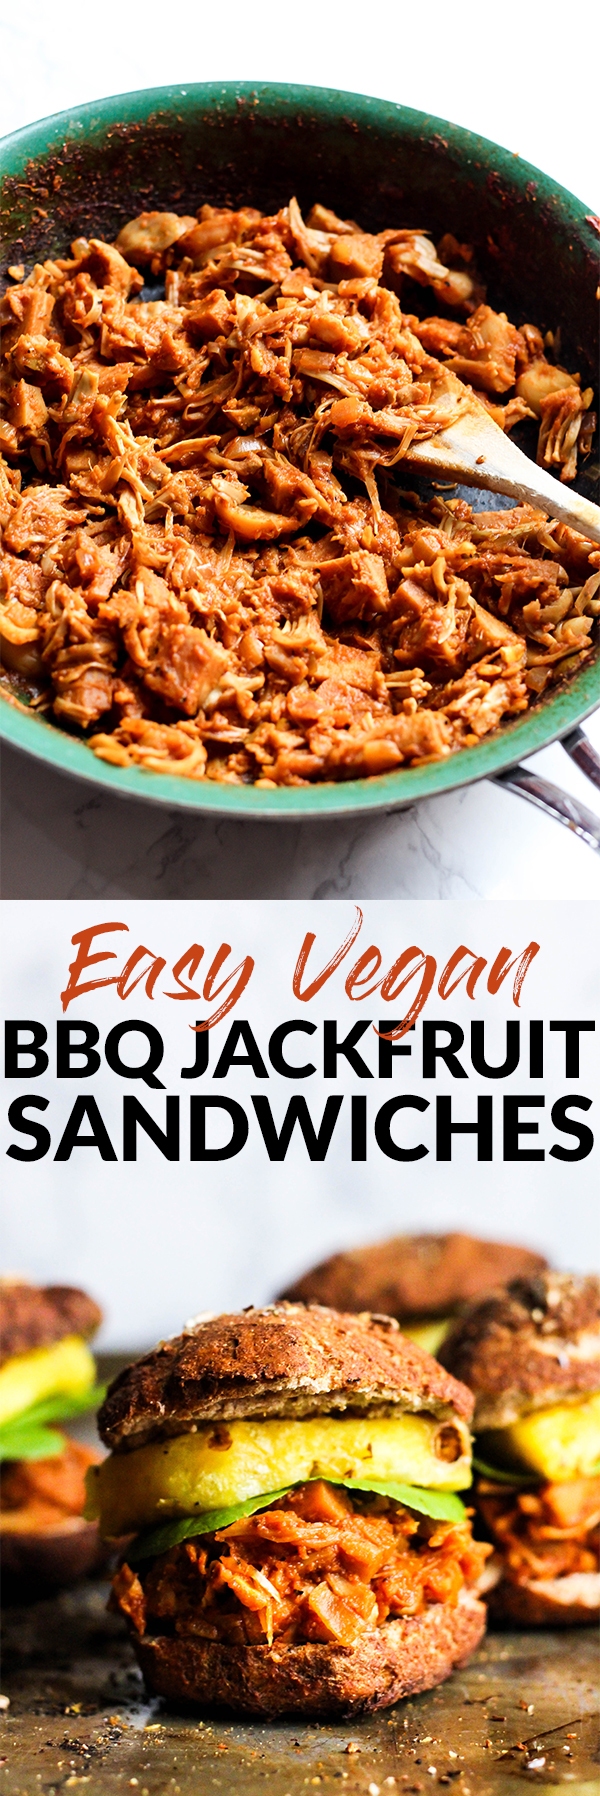 Meet jackfruit: the BEST vegan pulled pork alternative! These Easy Vegan BBQ Jackfruit Sandwiches are your new summer staple for cook-outs & parties.